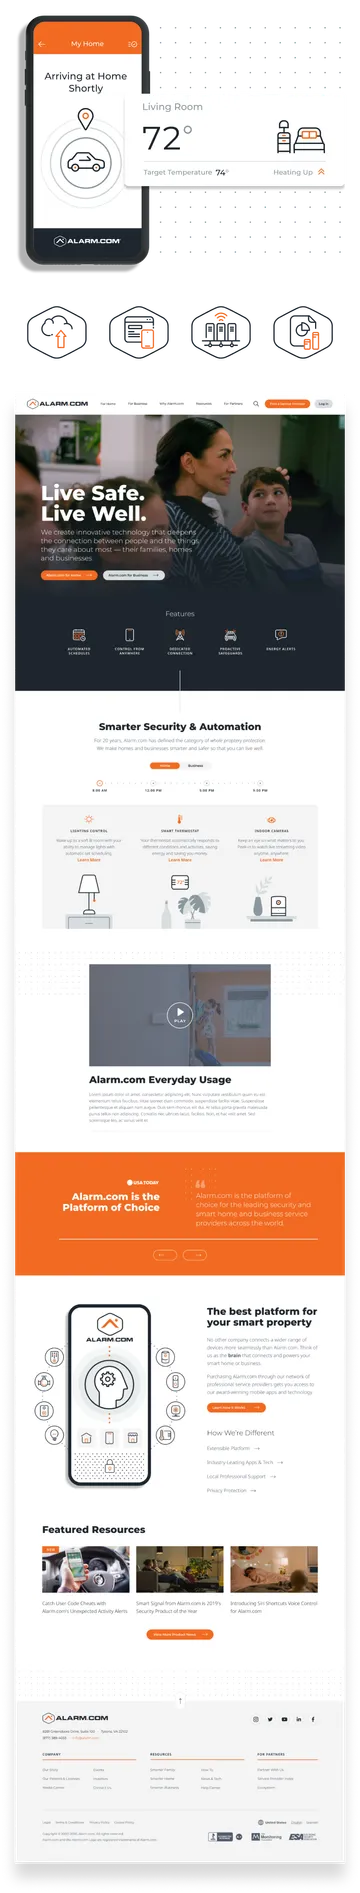 An image of Alarm.com's homepage along with some branding assets and illustrations